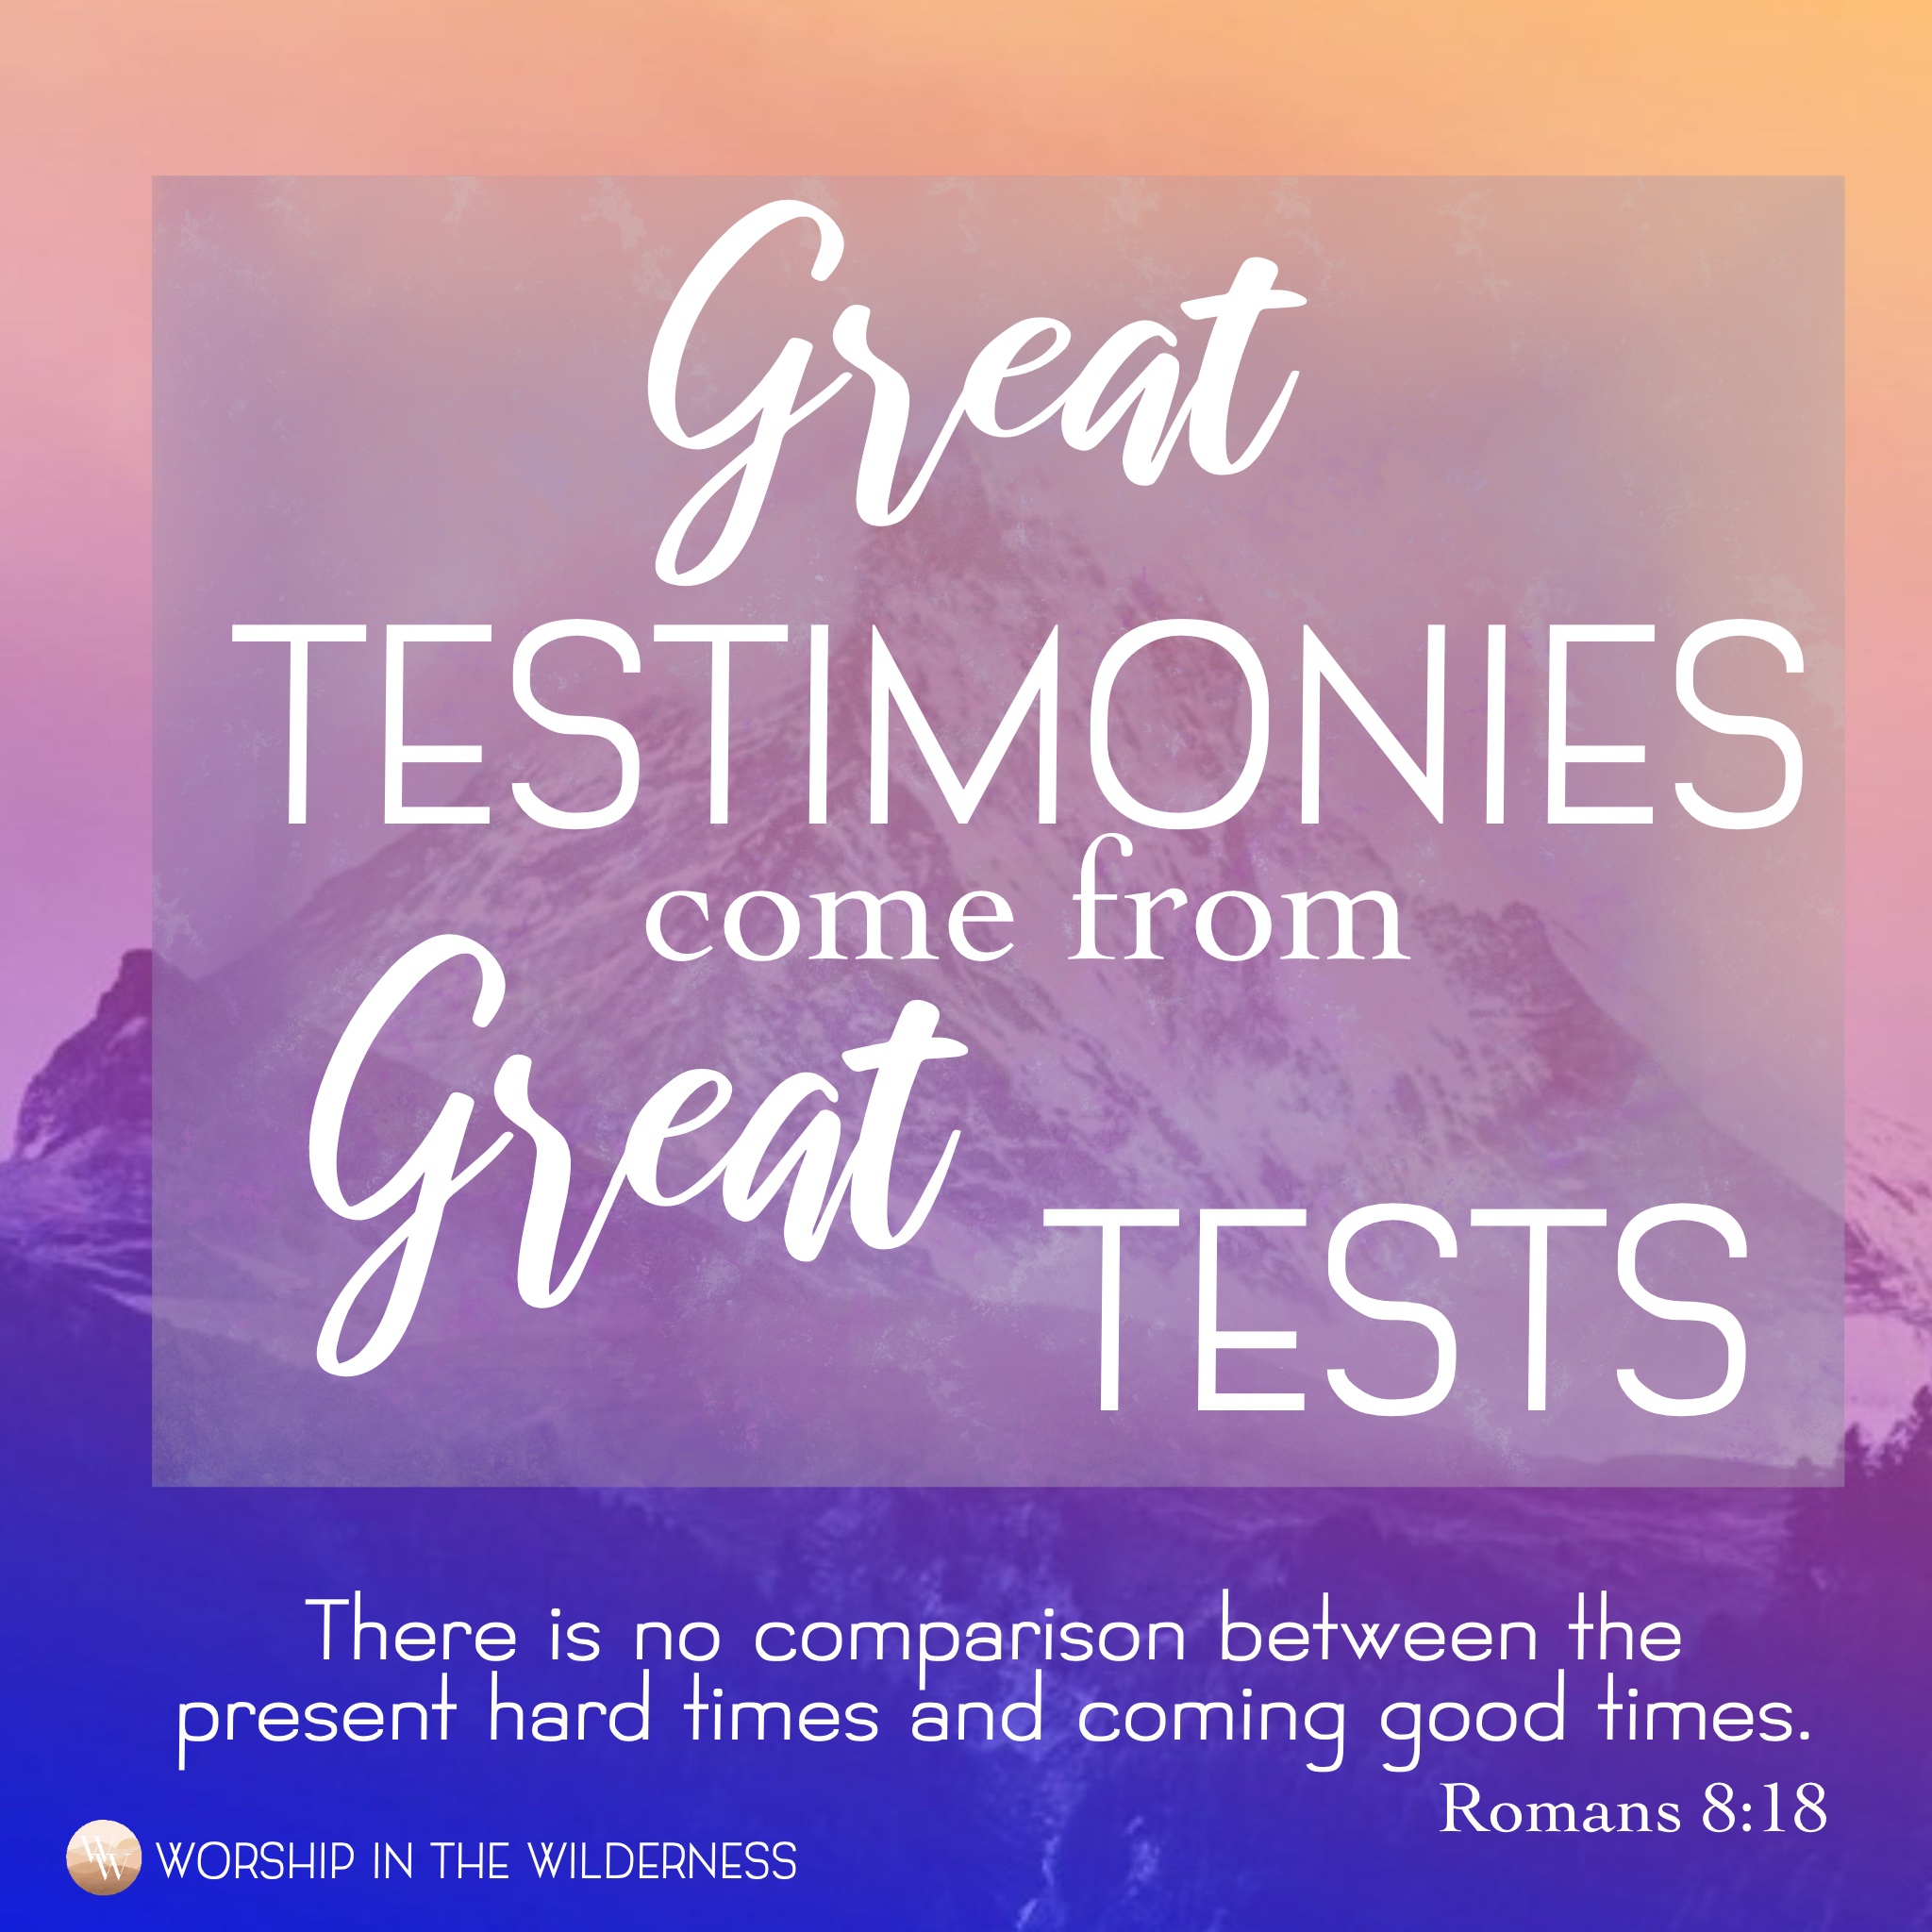 GREAT TESTIMONIES COME FROM GREAT TESTS